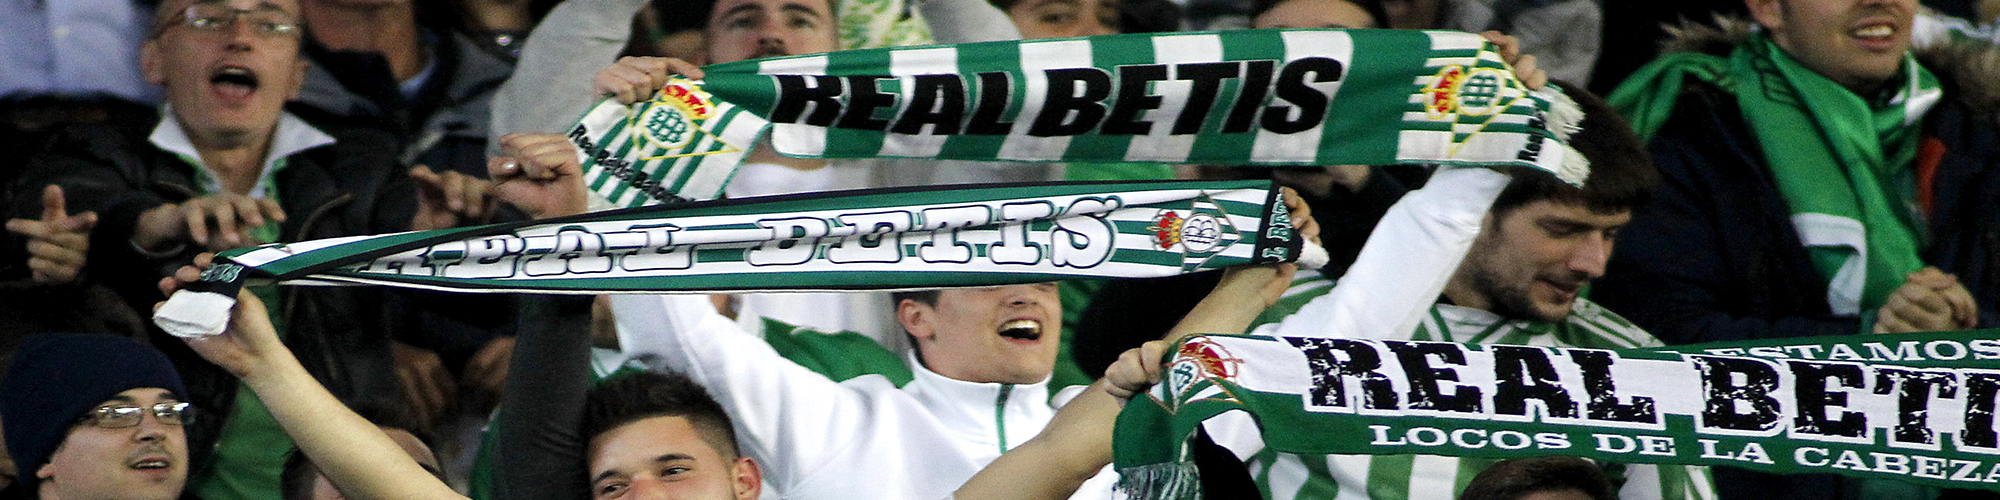 Betis Tickets & Experiences